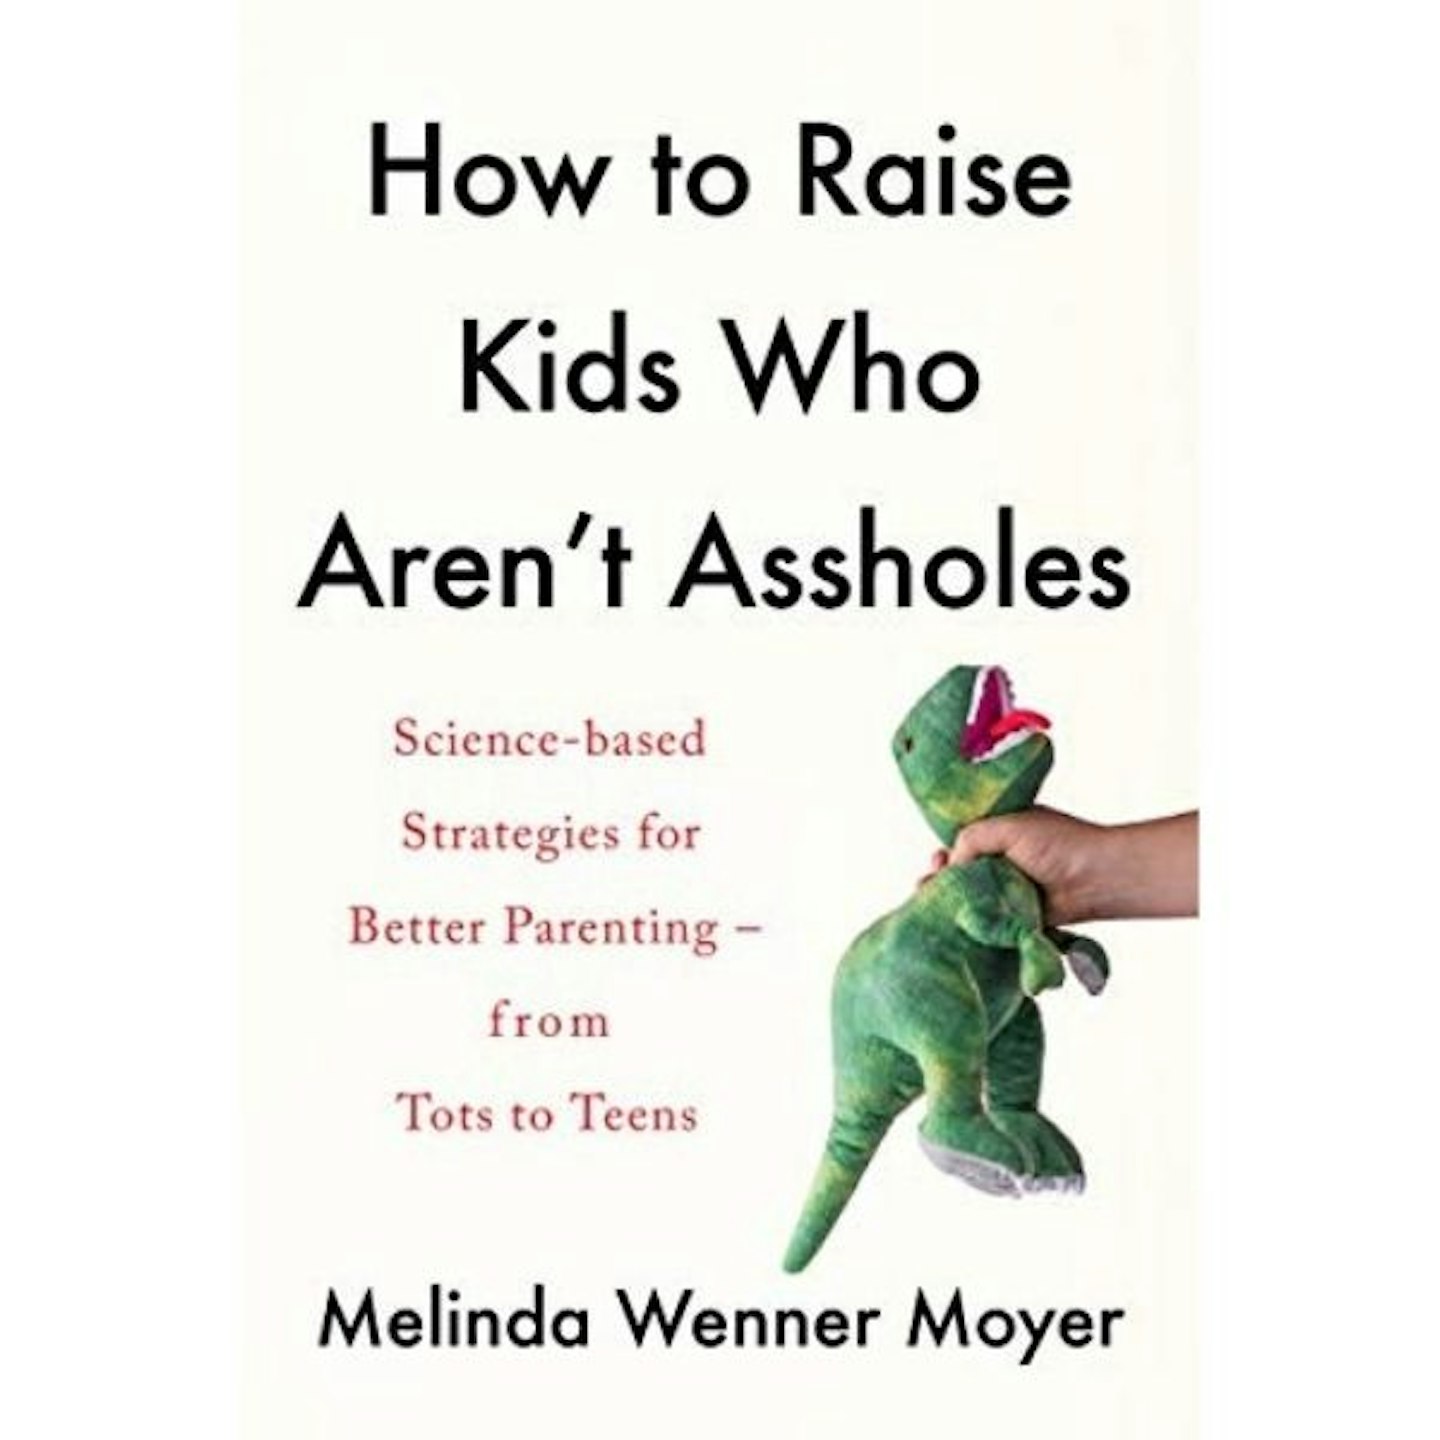 How to Raise Kids Who Aren't Assholes, By Melinda Wenner Moyer